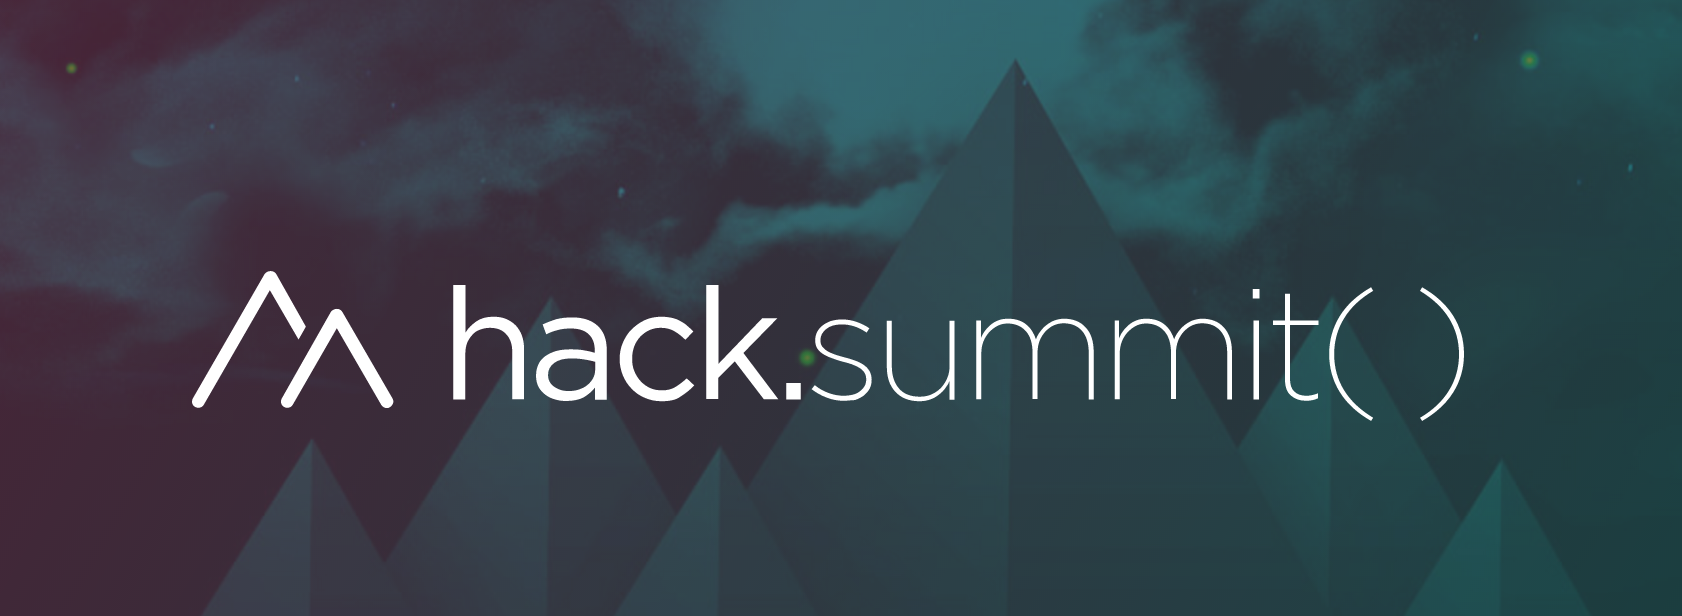 hack.summit() Event for Developers Will Be Live-Streamed February 22-24